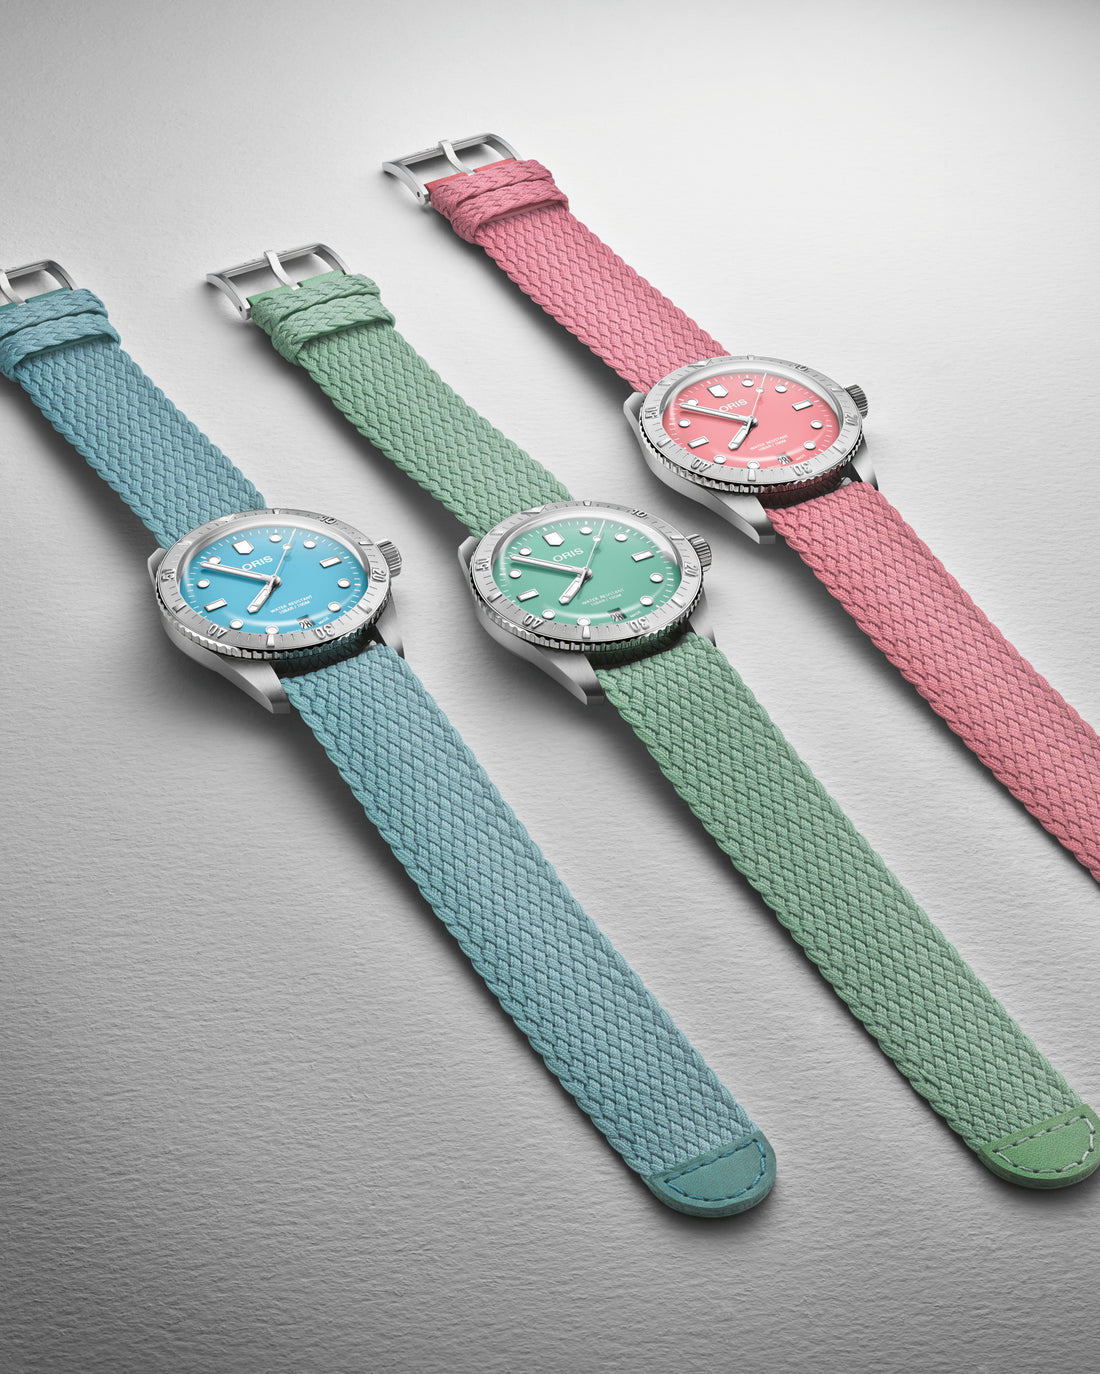 Oris Unveils New Cotton Candy Collection